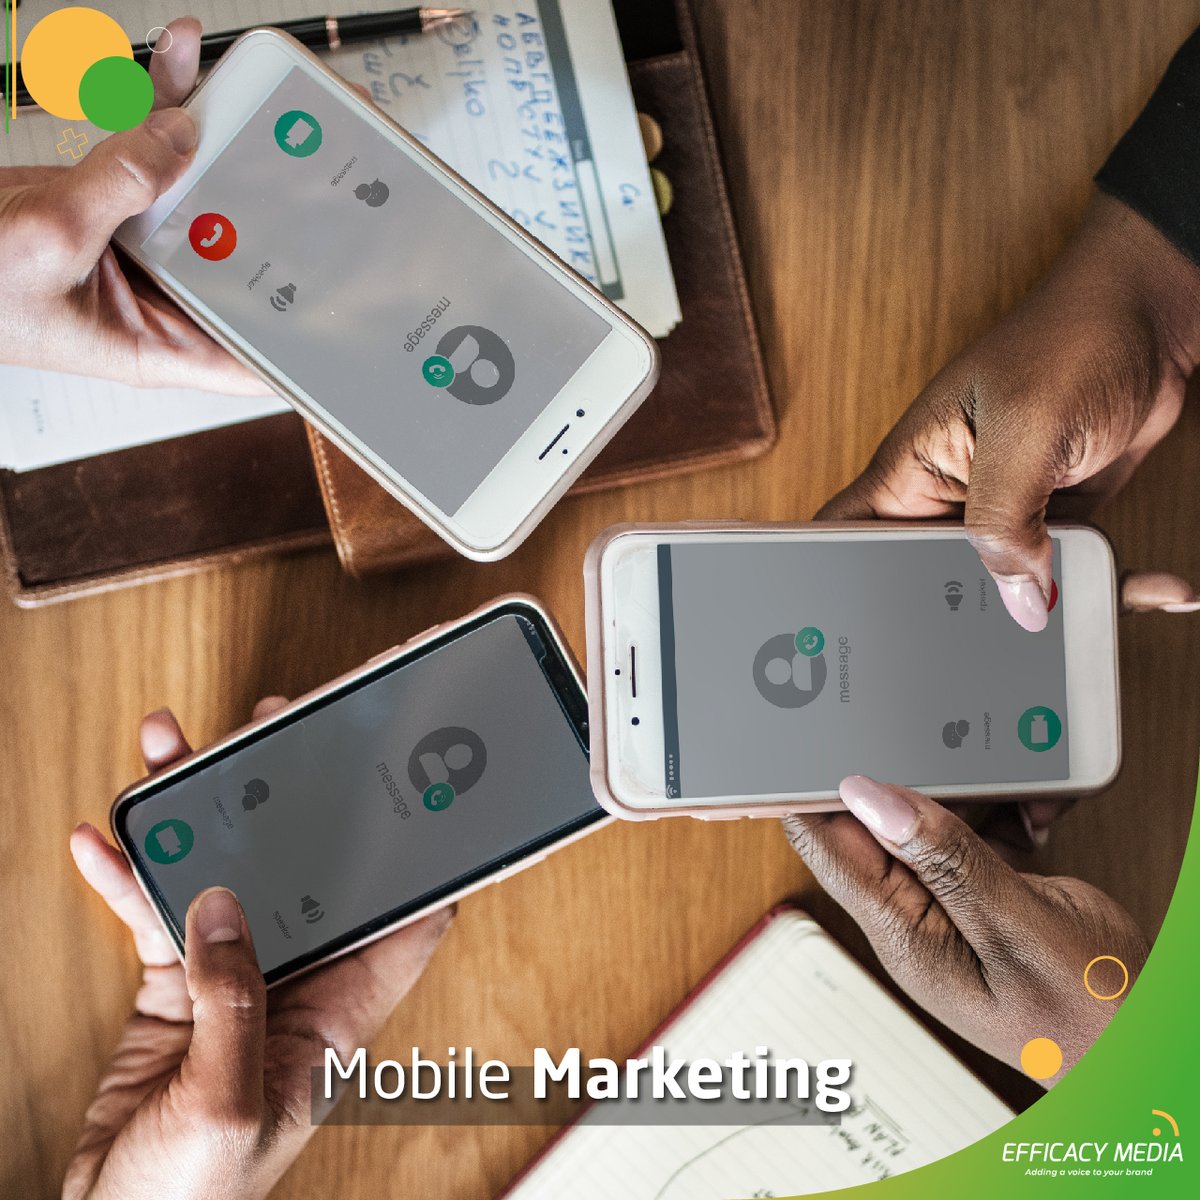 Efficacy Media: Mobile Marketing Masters!  We craft compelling content, target precisely, and drive results. Partner with us for dynamic mobile campaigns that resonate. engage us at efficacymedia.co

#EfficacyMedia #MobileMarketingExperts #DriveResults